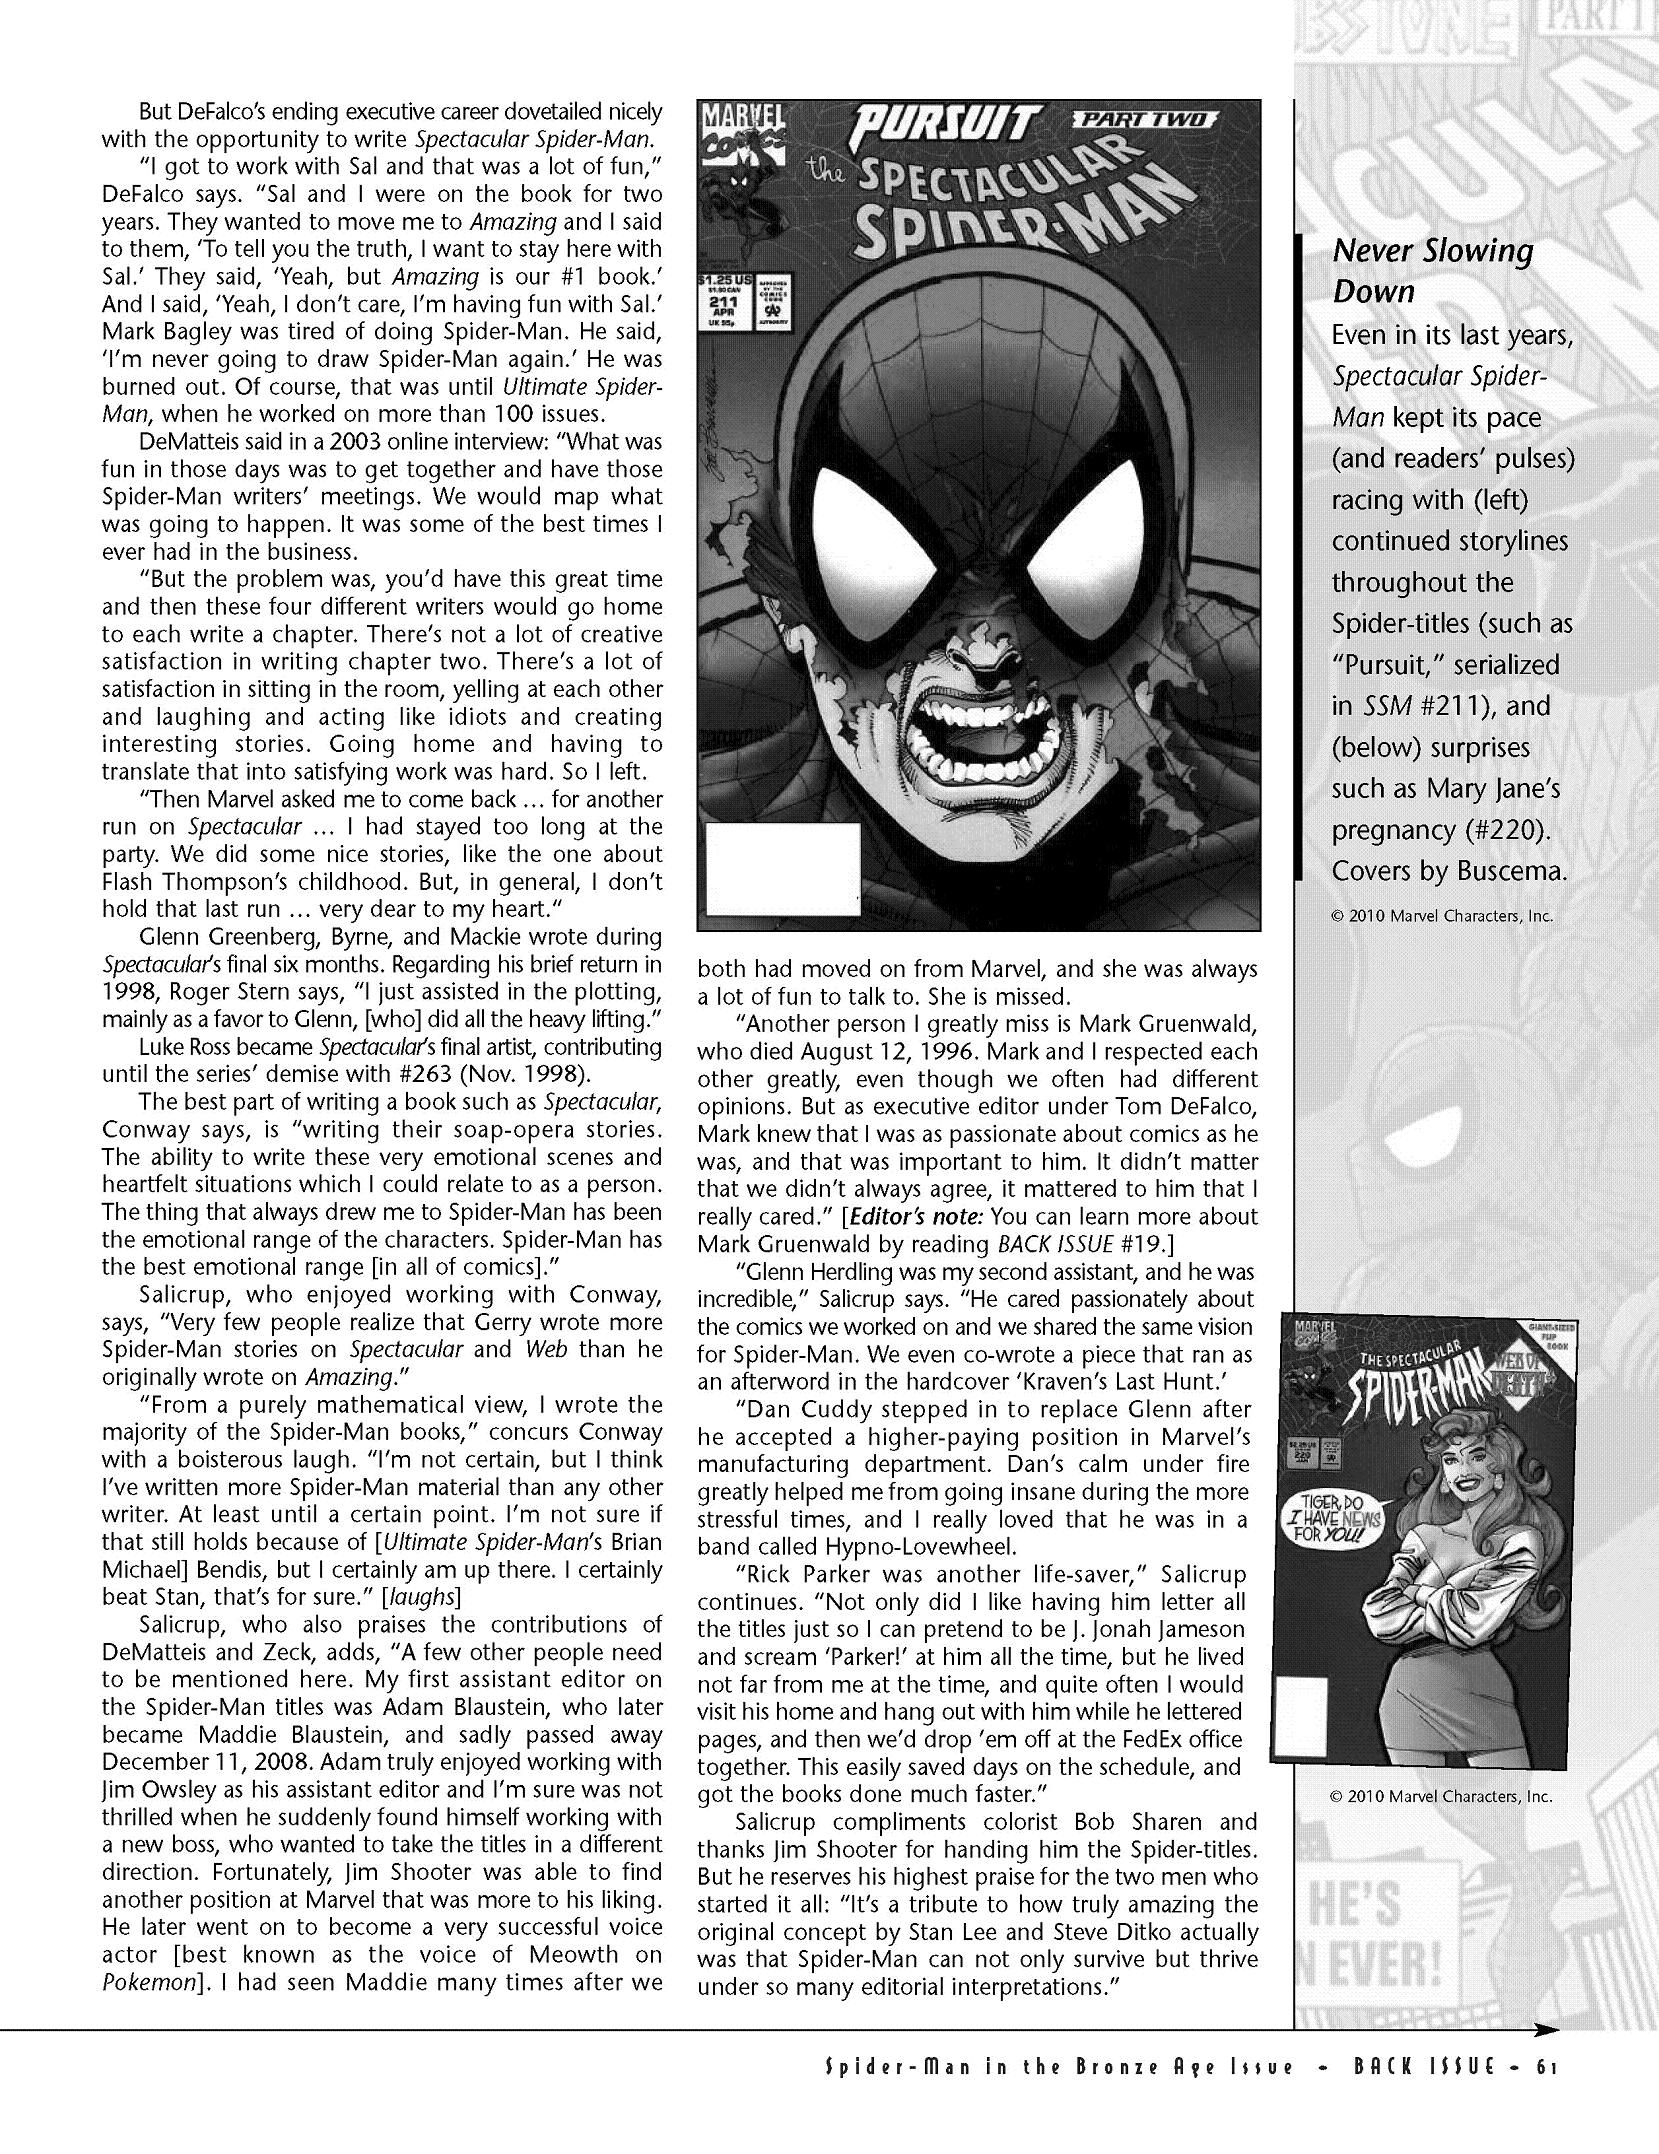 Read online Back Issue comic -  Issue #44 - 62